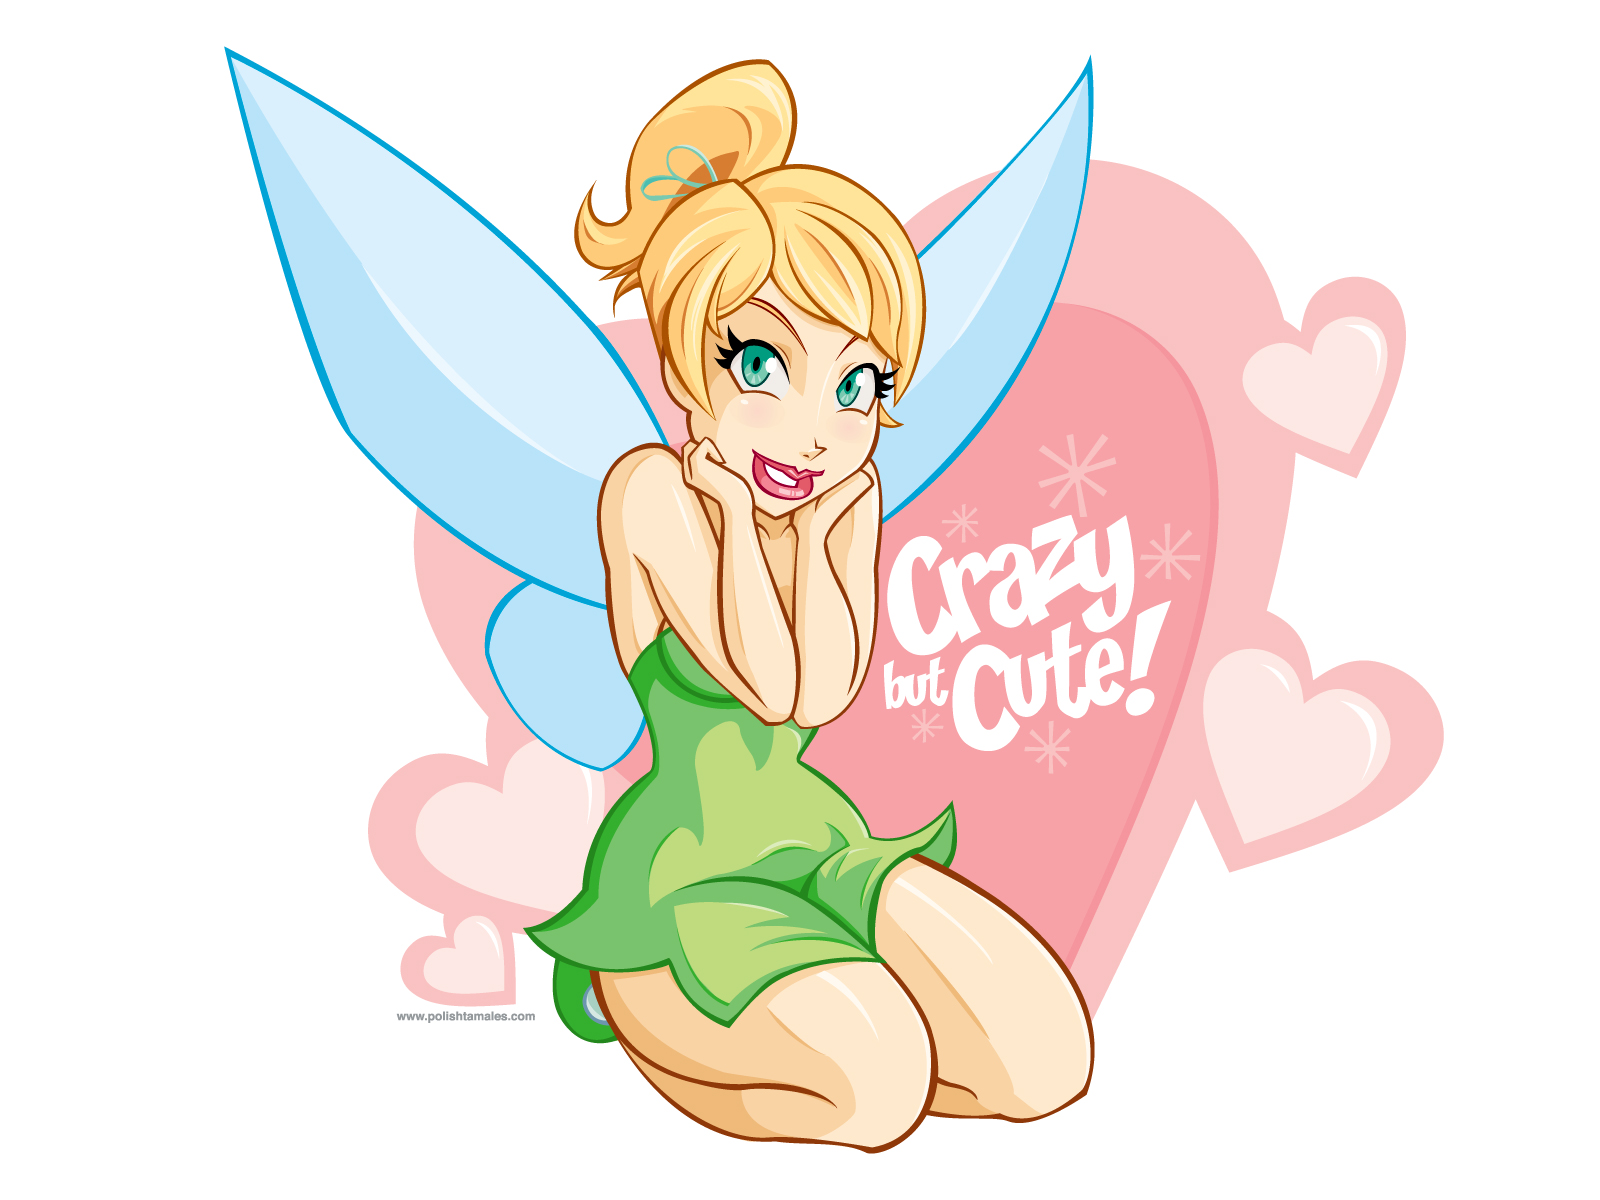 Sexy nude tinkerbell art - Porn pictures